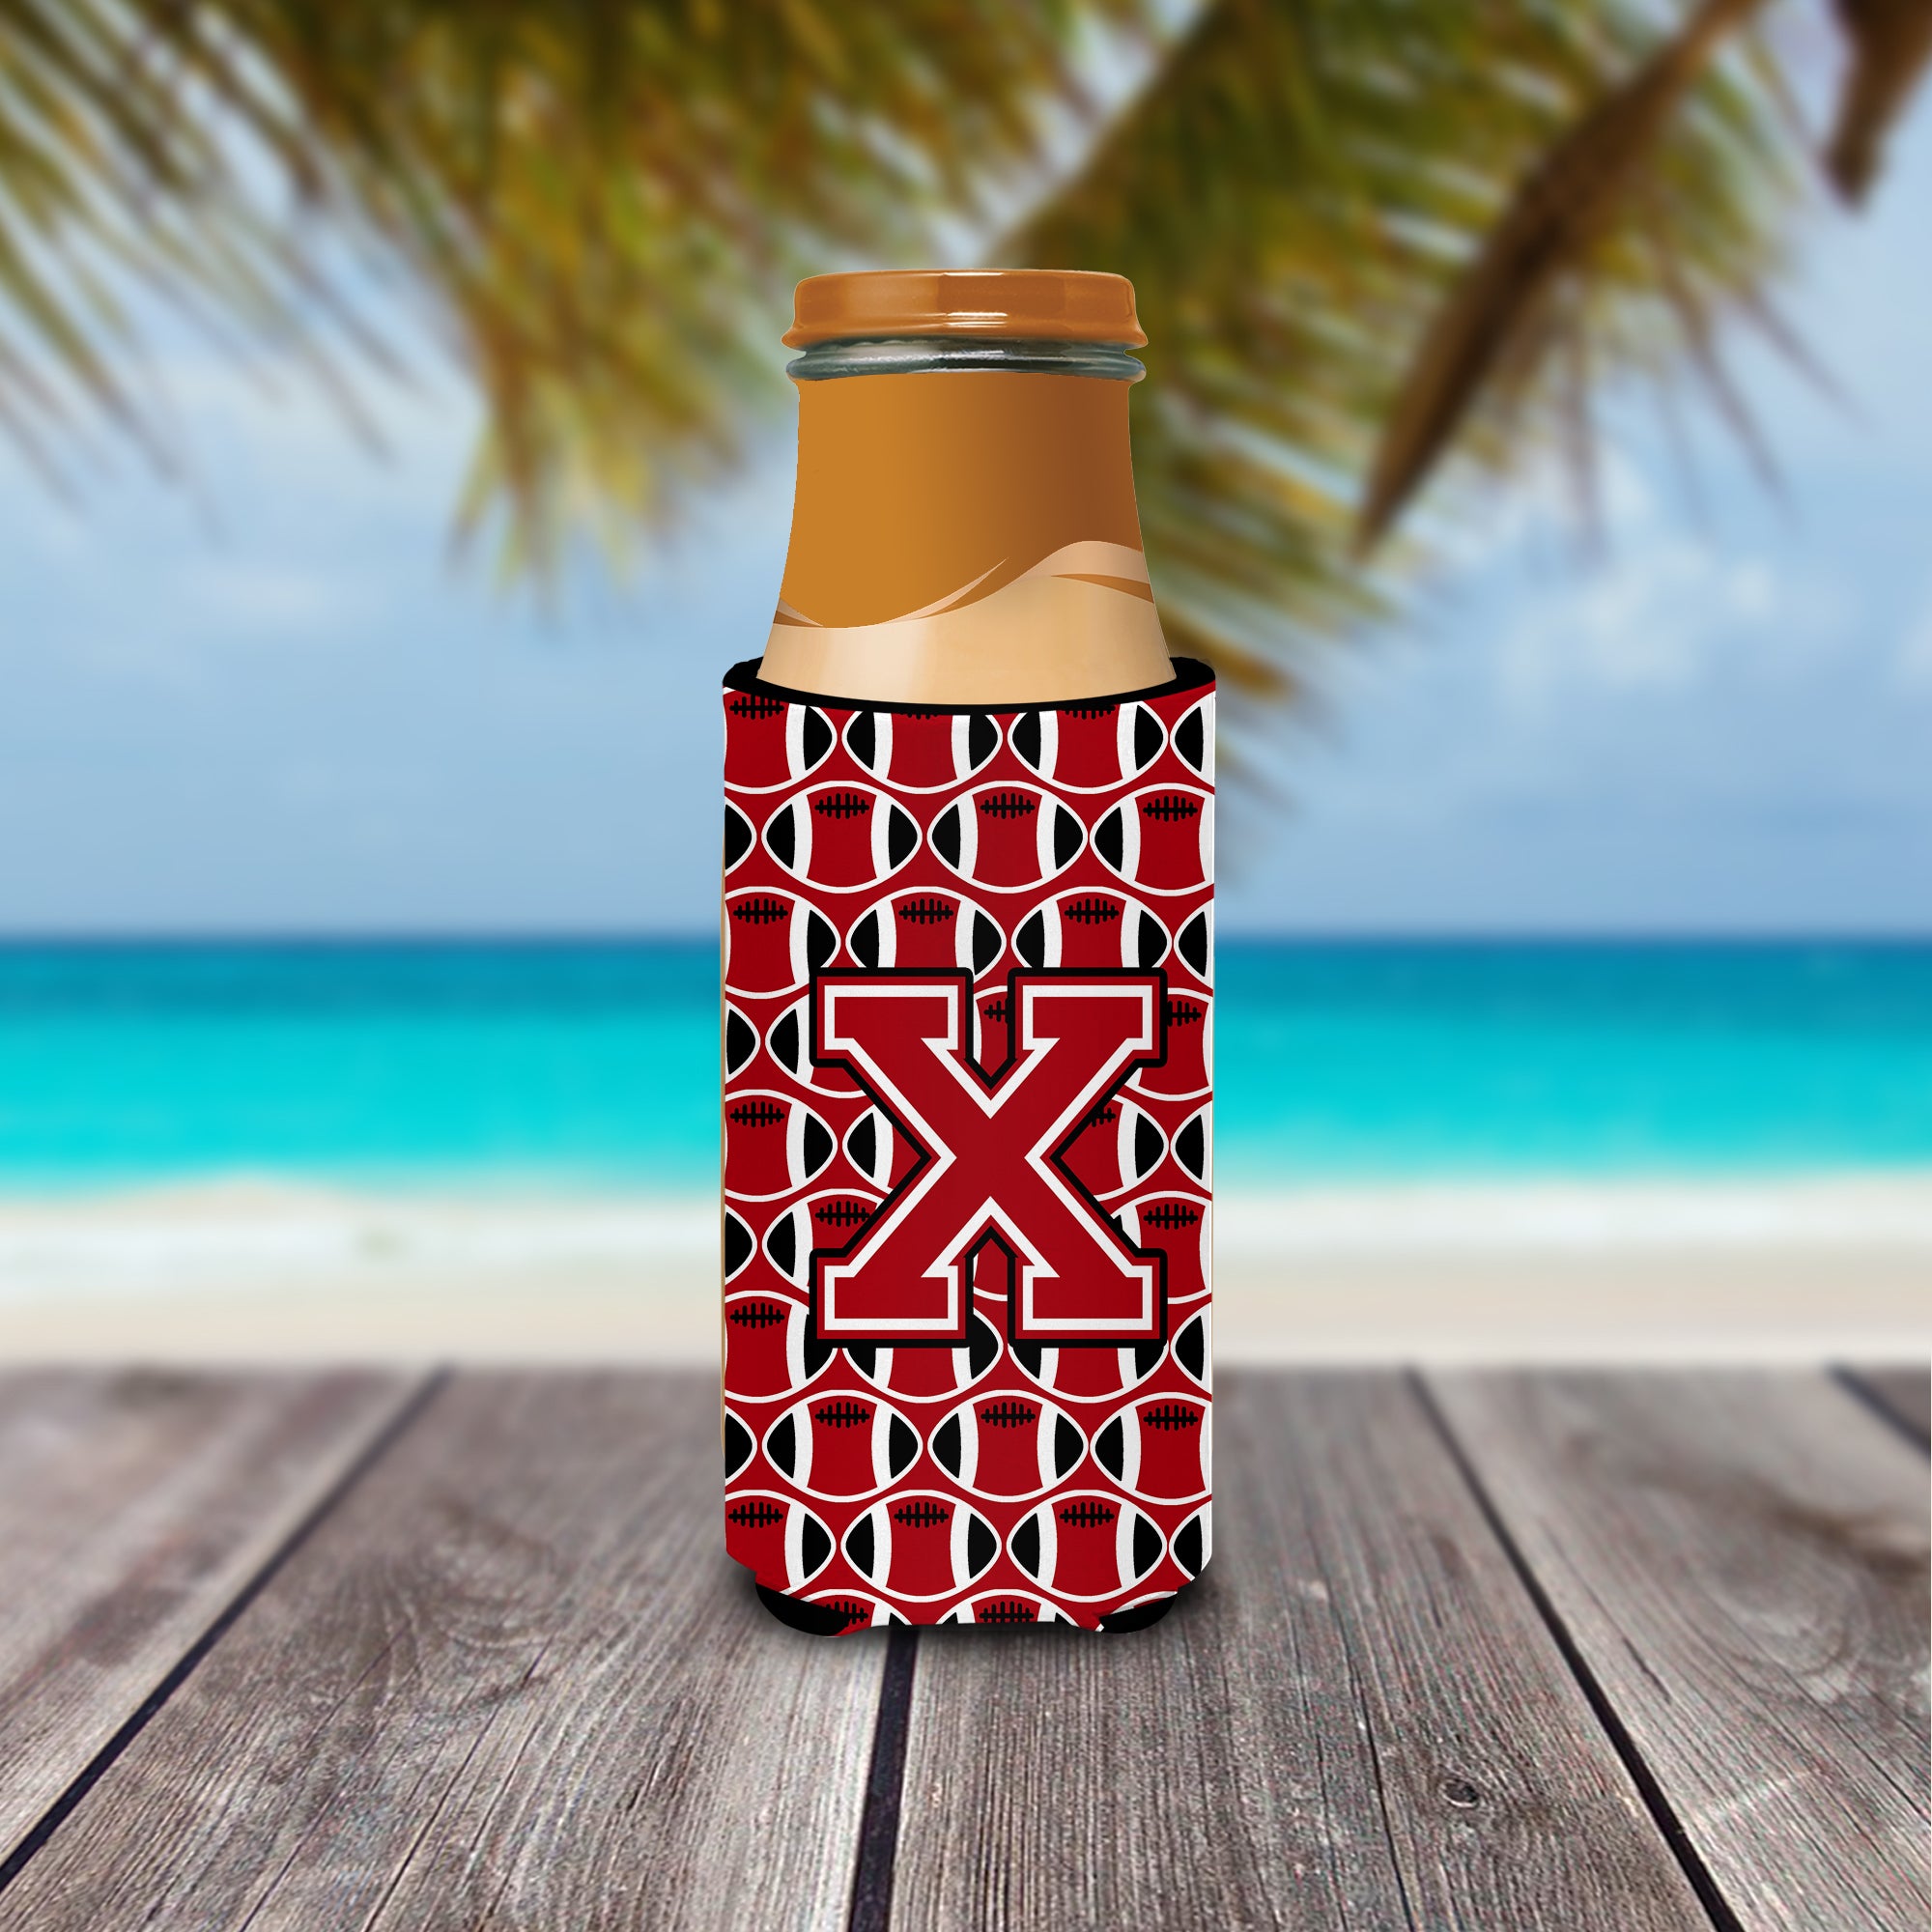 Letter X Football Red, Black and White Ultra Beverage Insulators for slim cans CJ1073-XMUK.